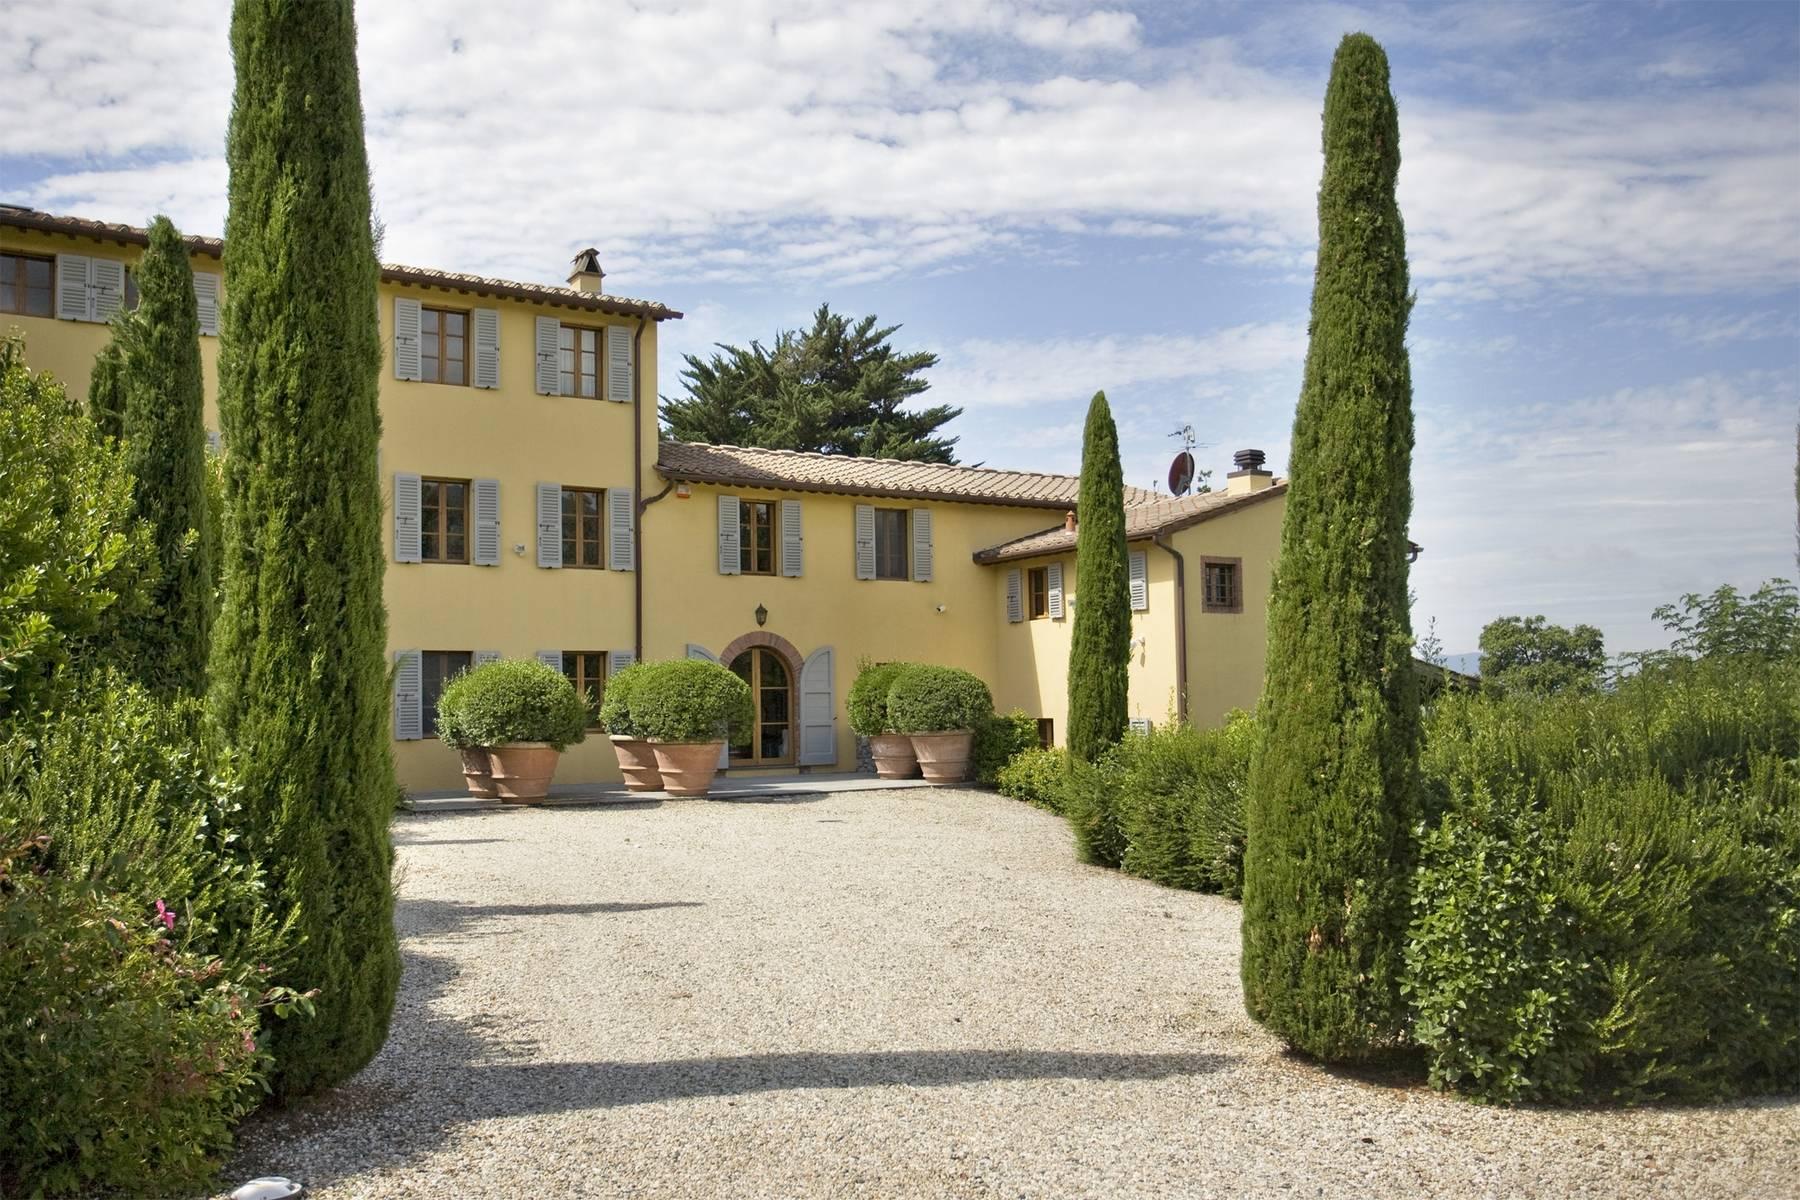 Remarkable luxury villa with olive grove and vineyard in the countryside of Lucca - 3